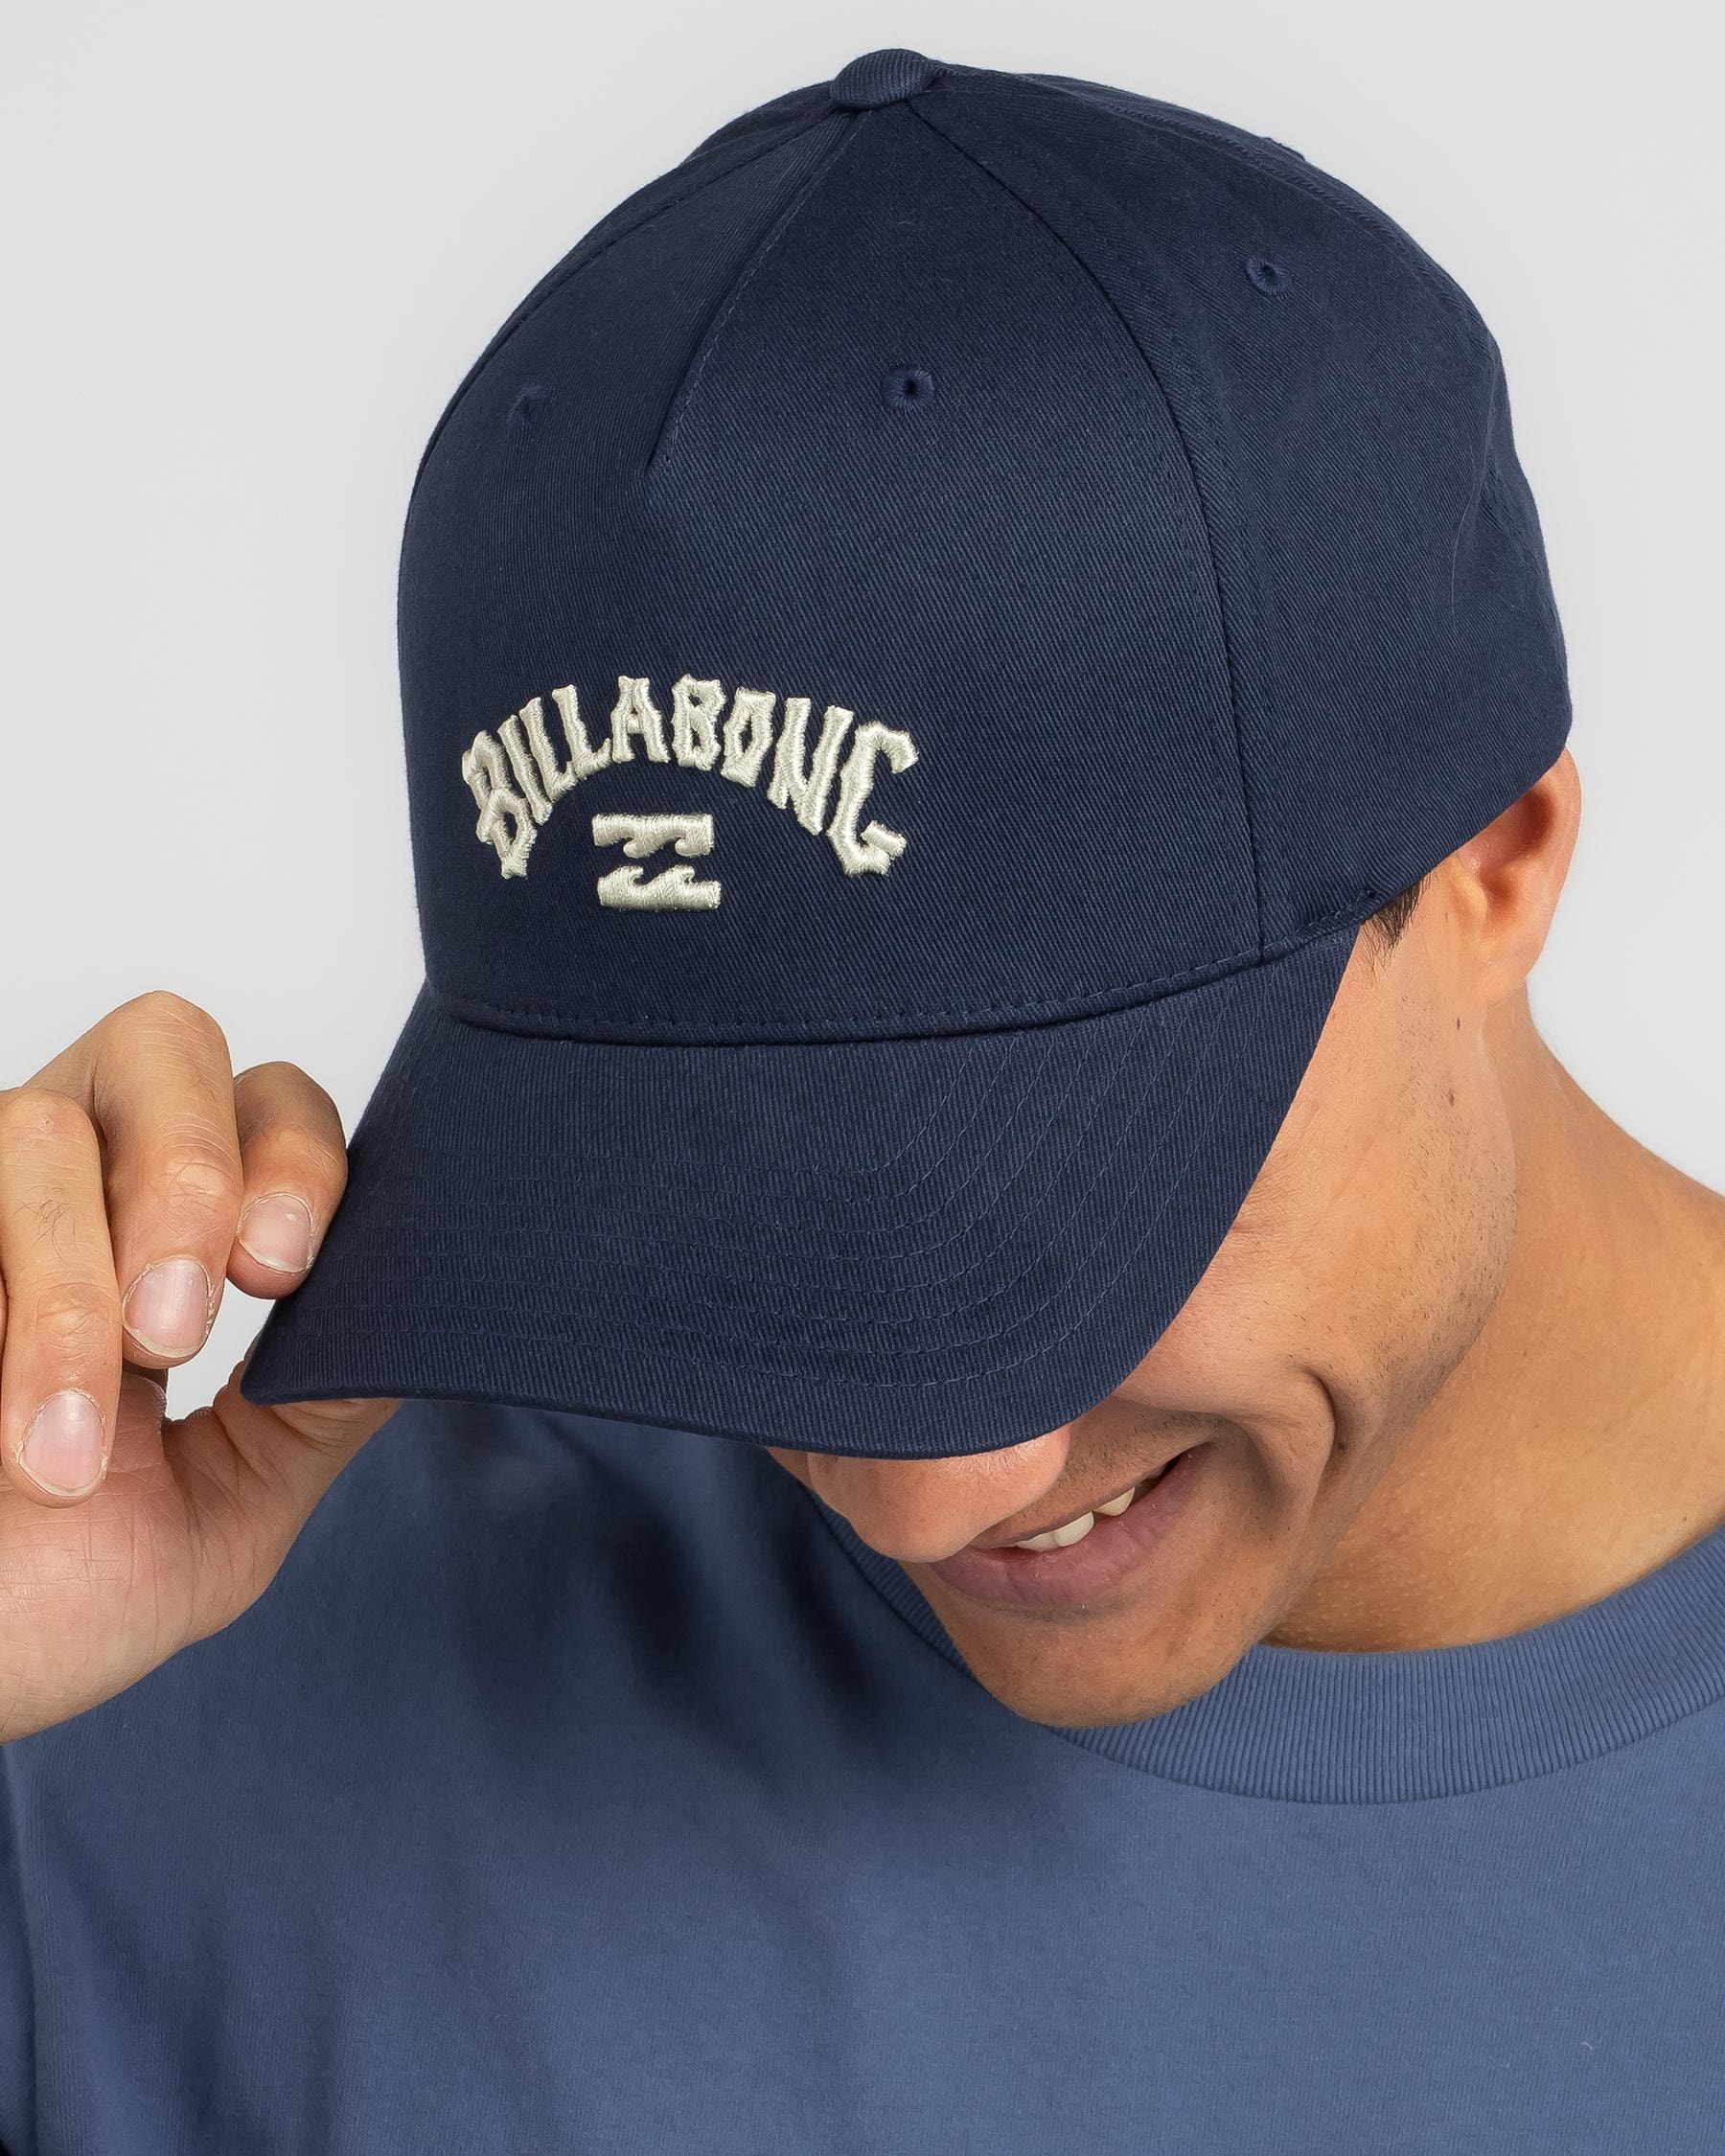 Billabong Arch Flexfit & Navy United Shipping Snapback 110 Cap - City FREE* States - Beach In Easy Returns